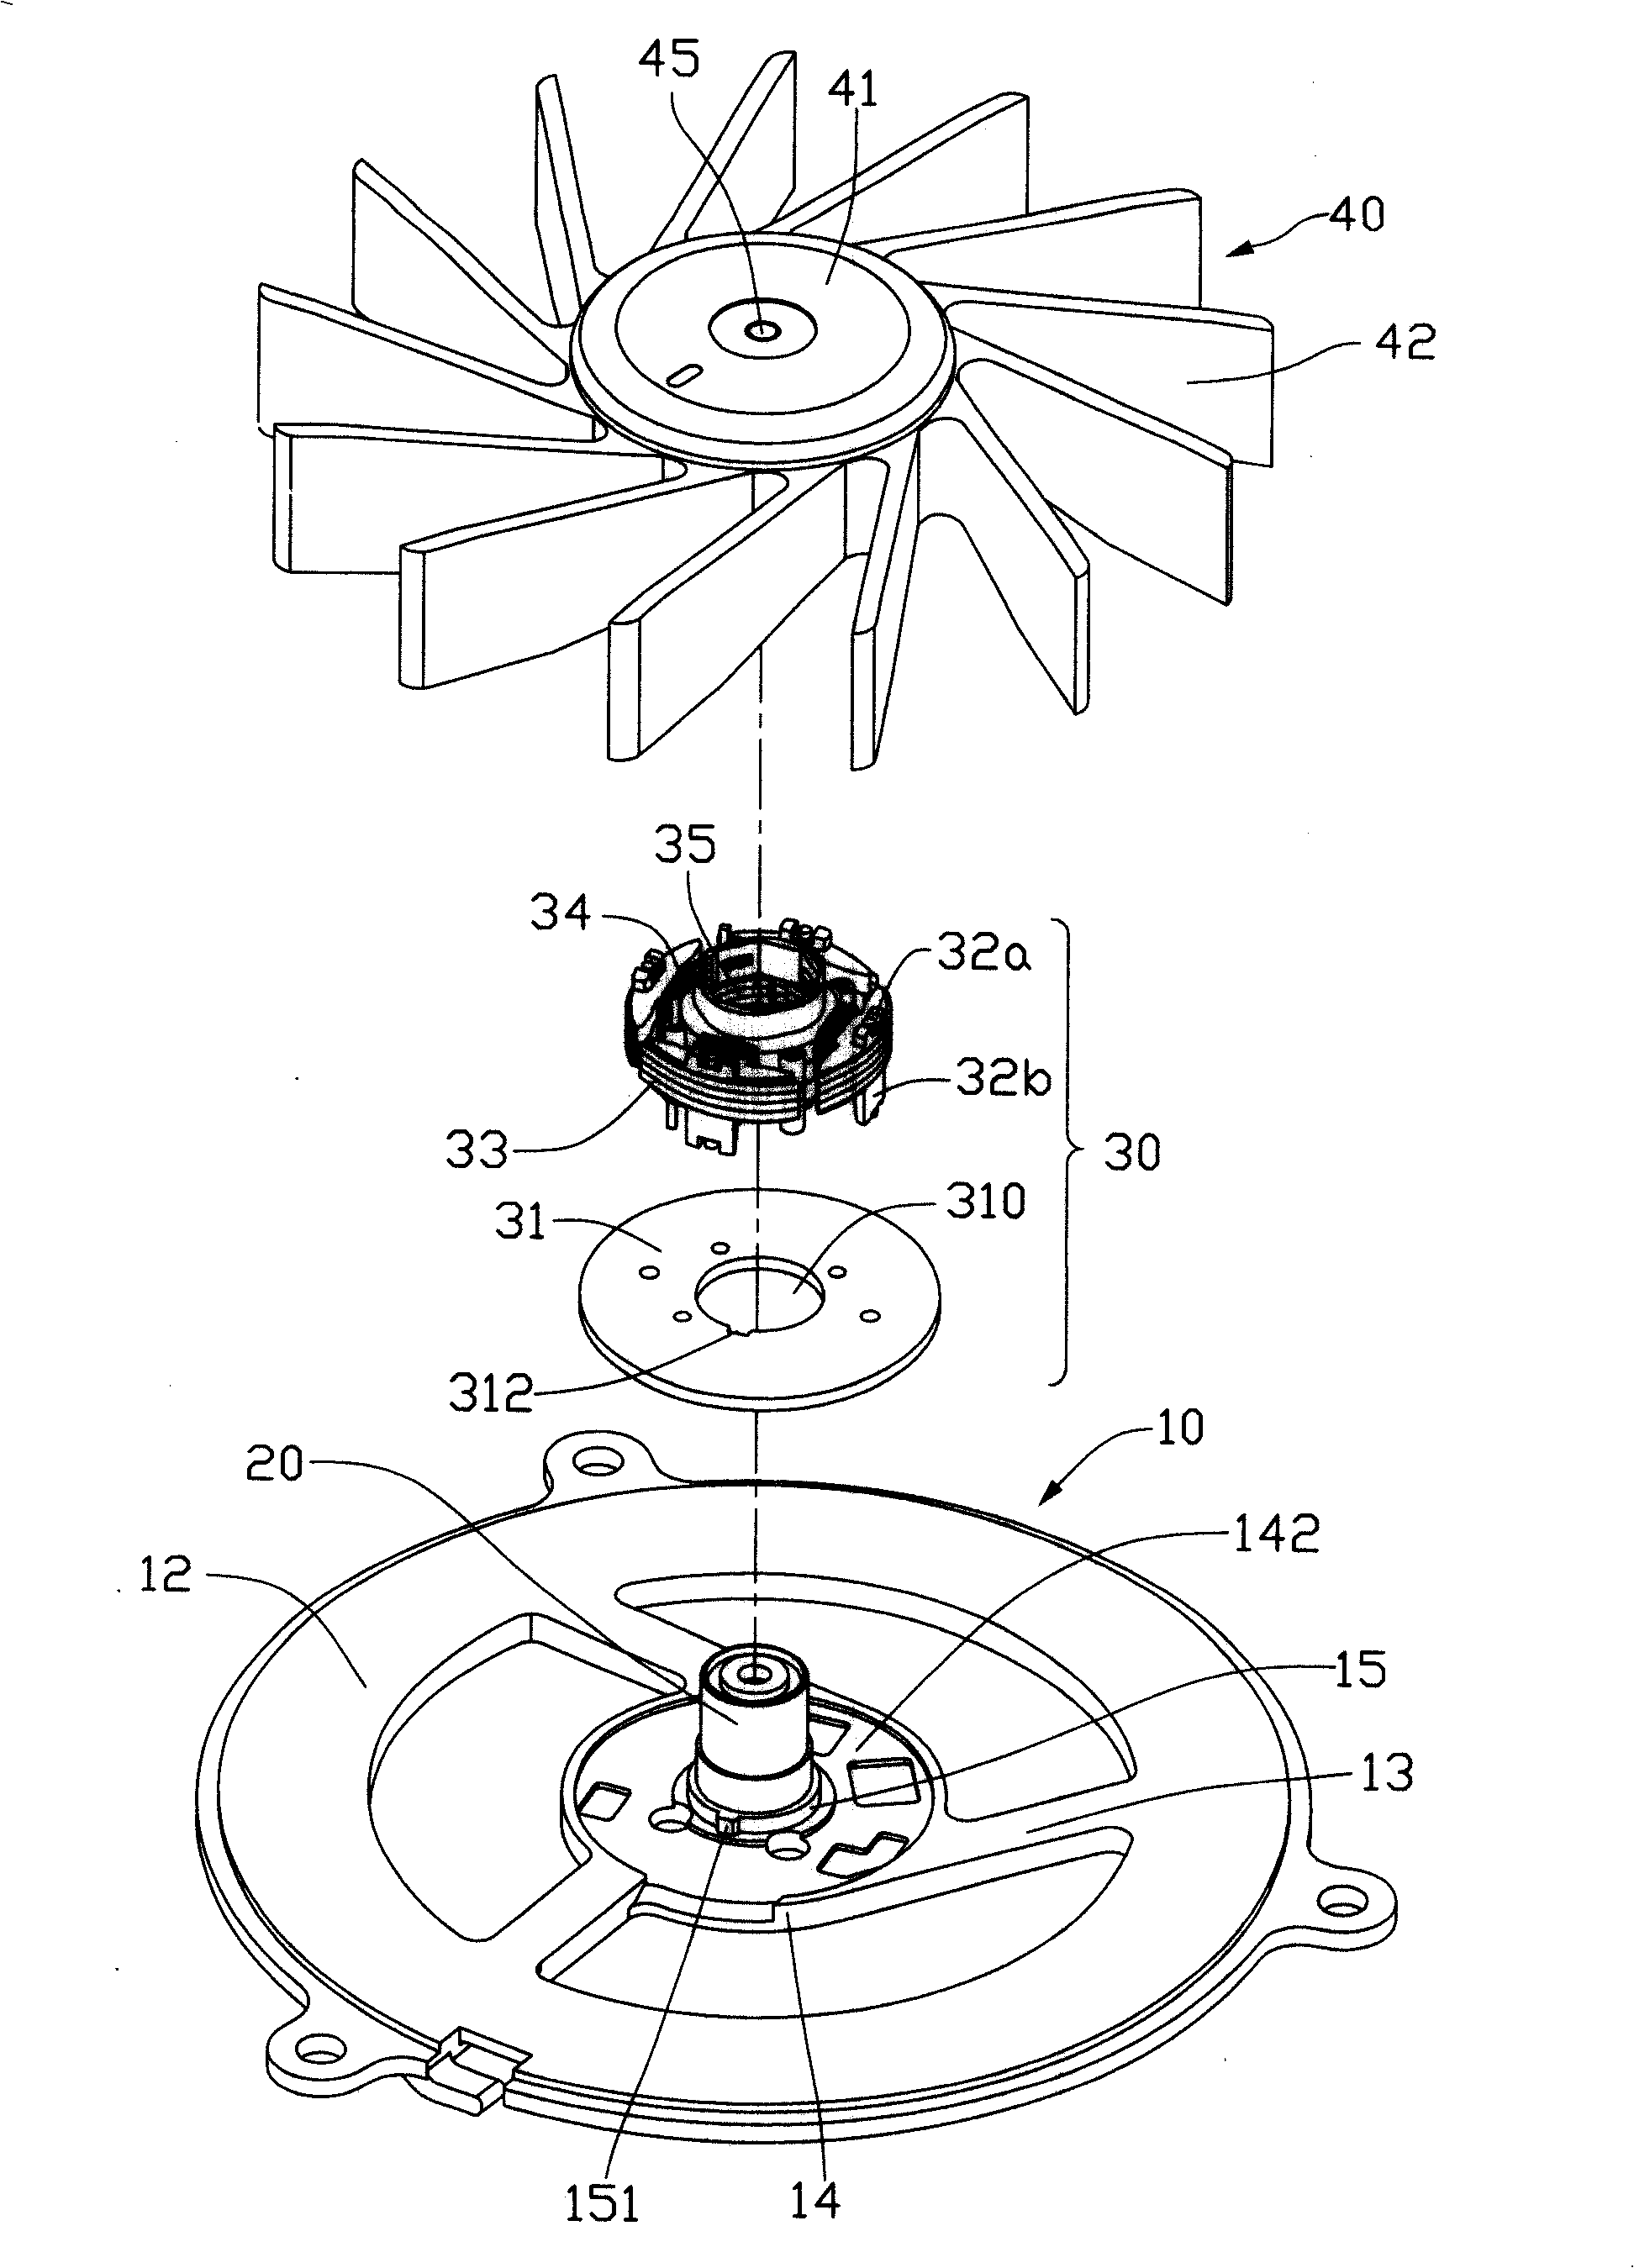 Heat radiation fan and method of manufacture